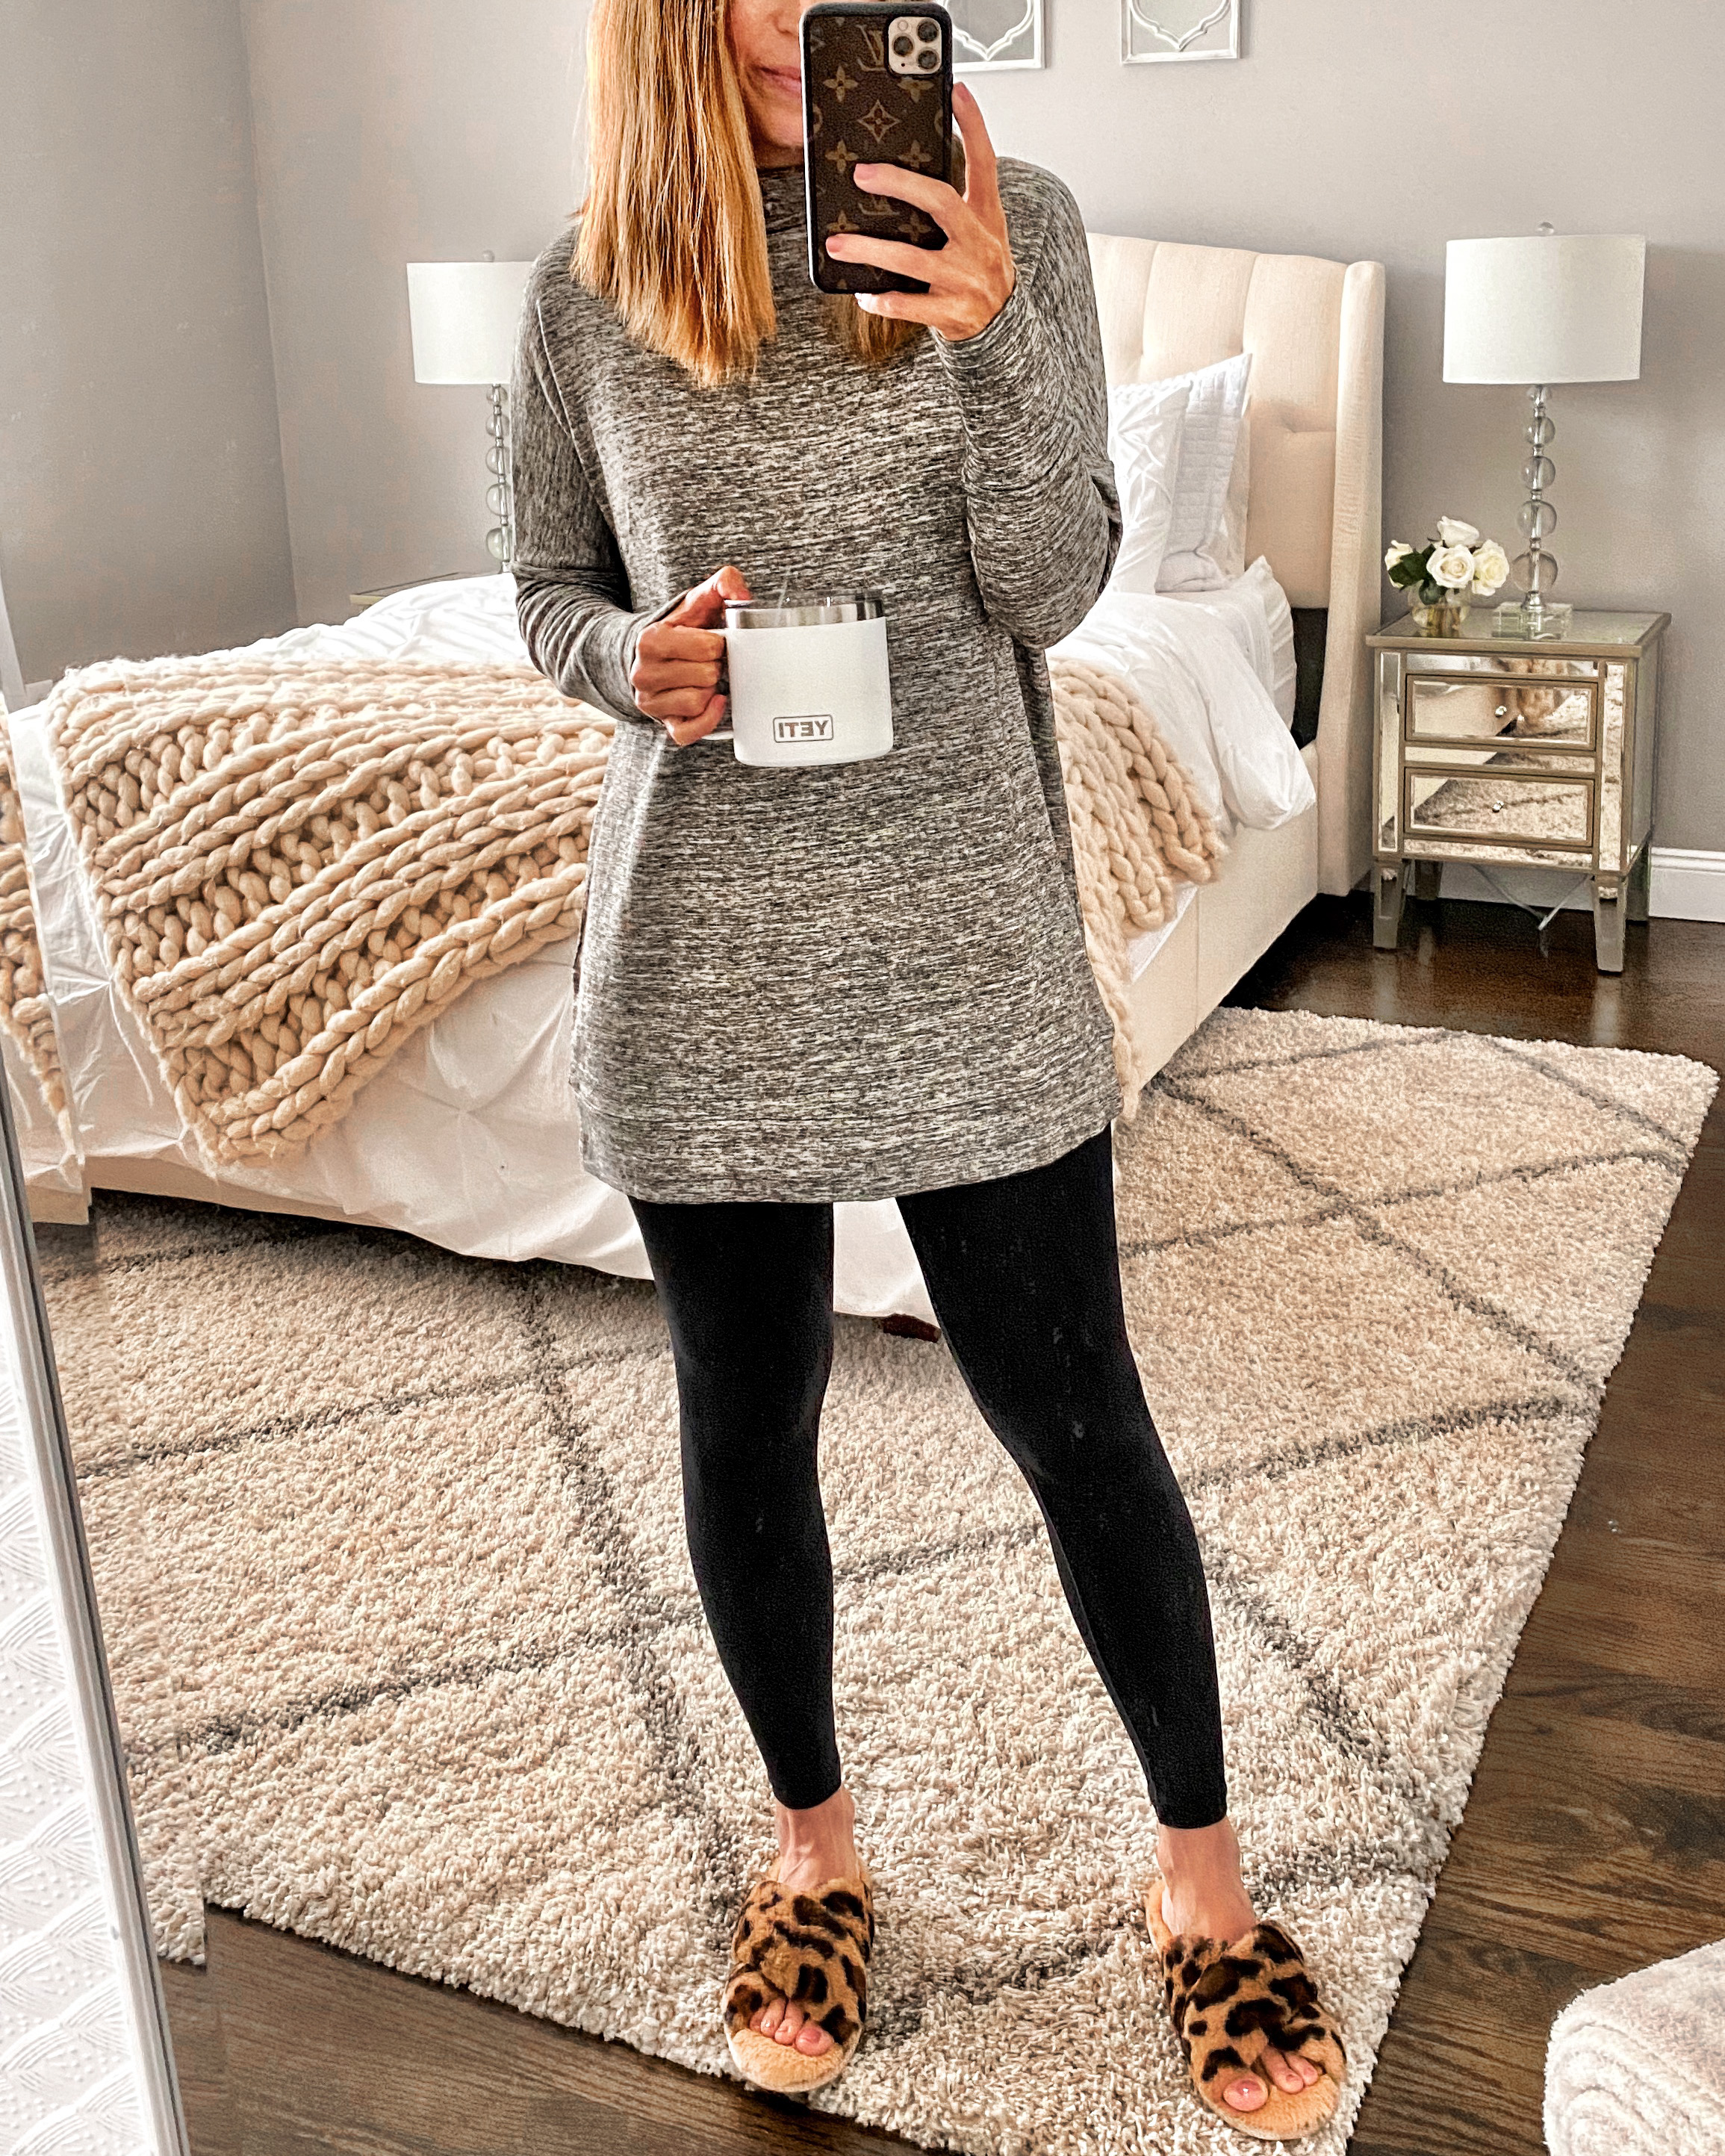 aerie style, aerie leggings, casual outfit inspo, abercrombie